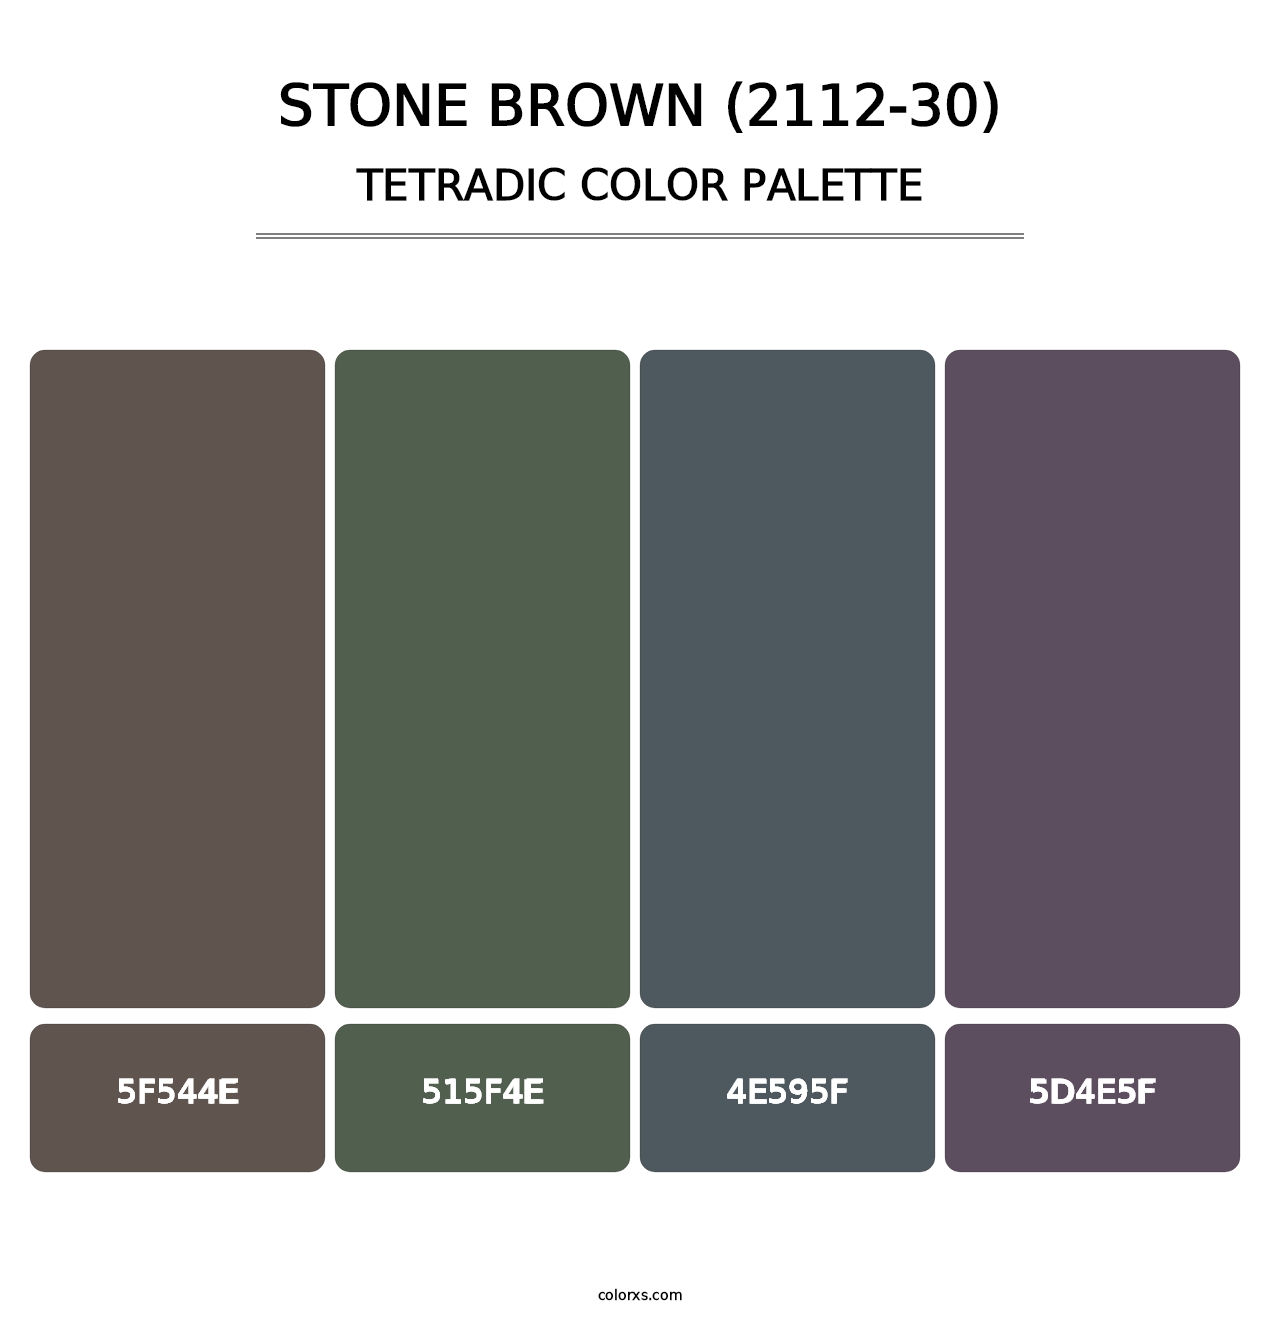 Stone Brown (2112-30) - Tetradic Color Palette